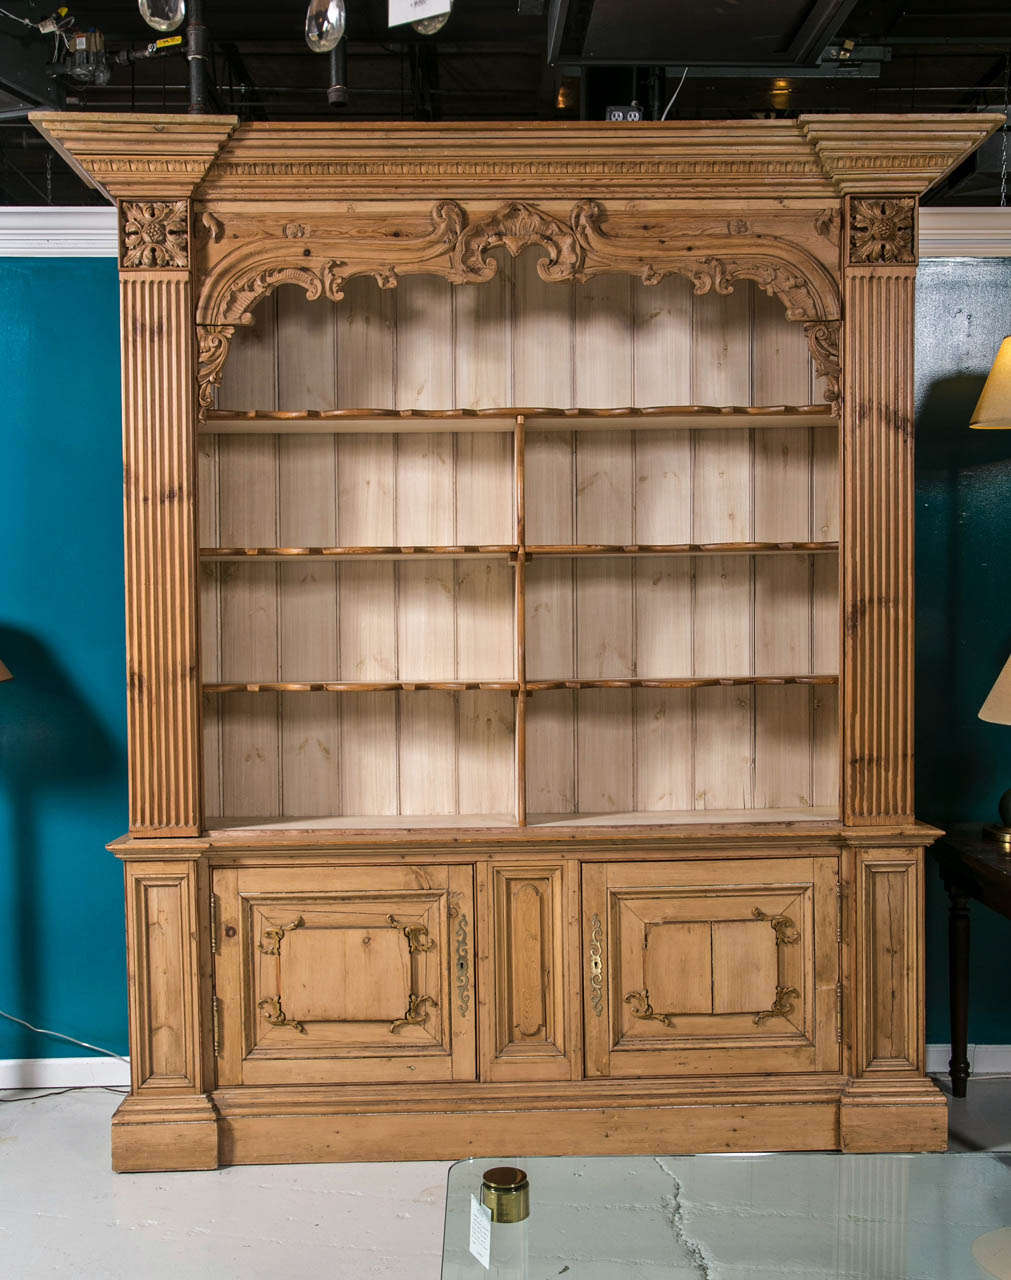 Carved Pine Open Cabinet over Two Paneled Cupboard with lock and original brass key.  Stong architectural elements, carved gothic style upper frame under cornice heading.  A handsome quiet piece for display of books, pottery, linens or collectables